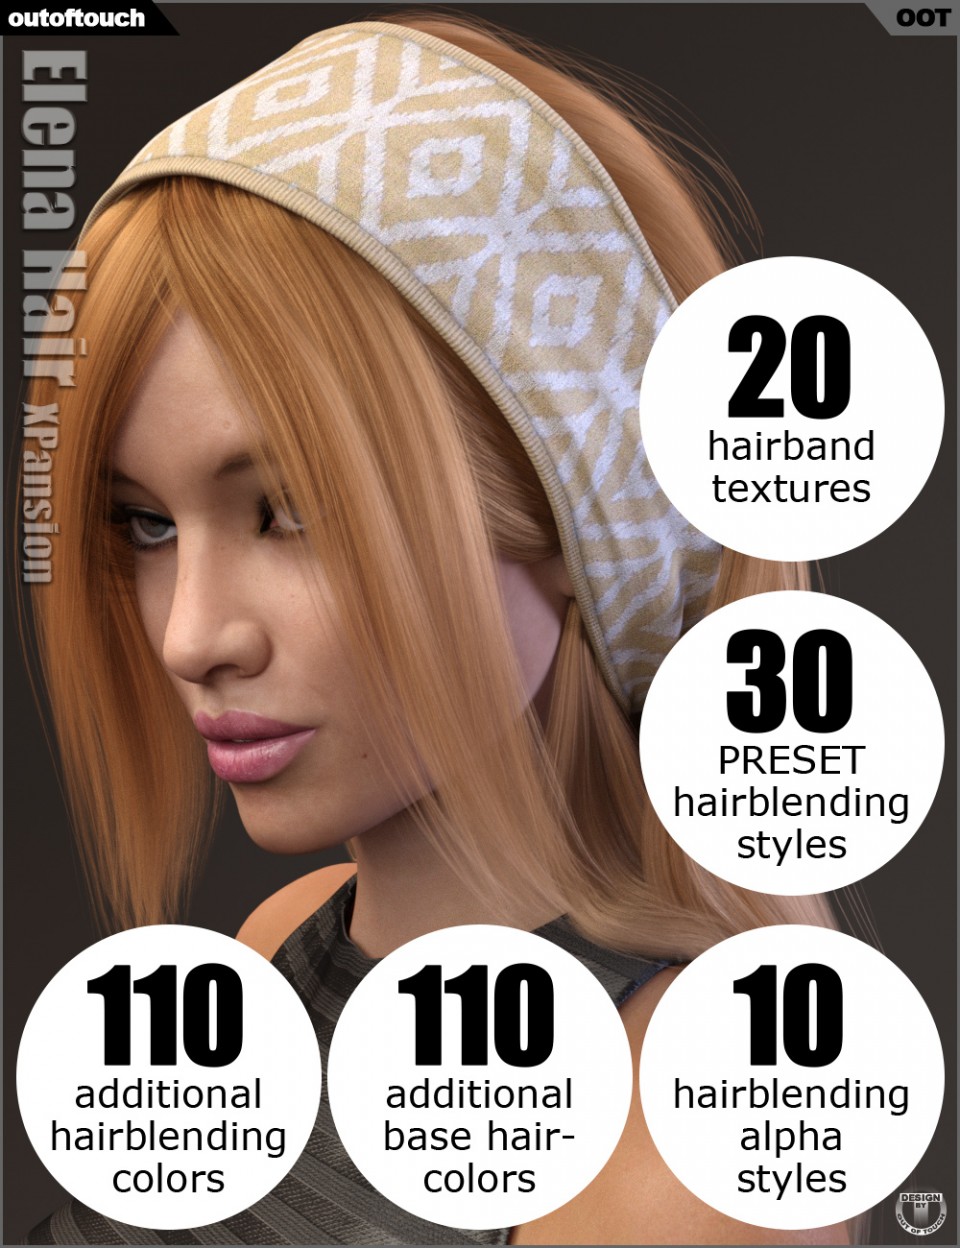 Elena Hair and OOT Hairblending 2.0 Texture XPansion_DAZ3D下载站